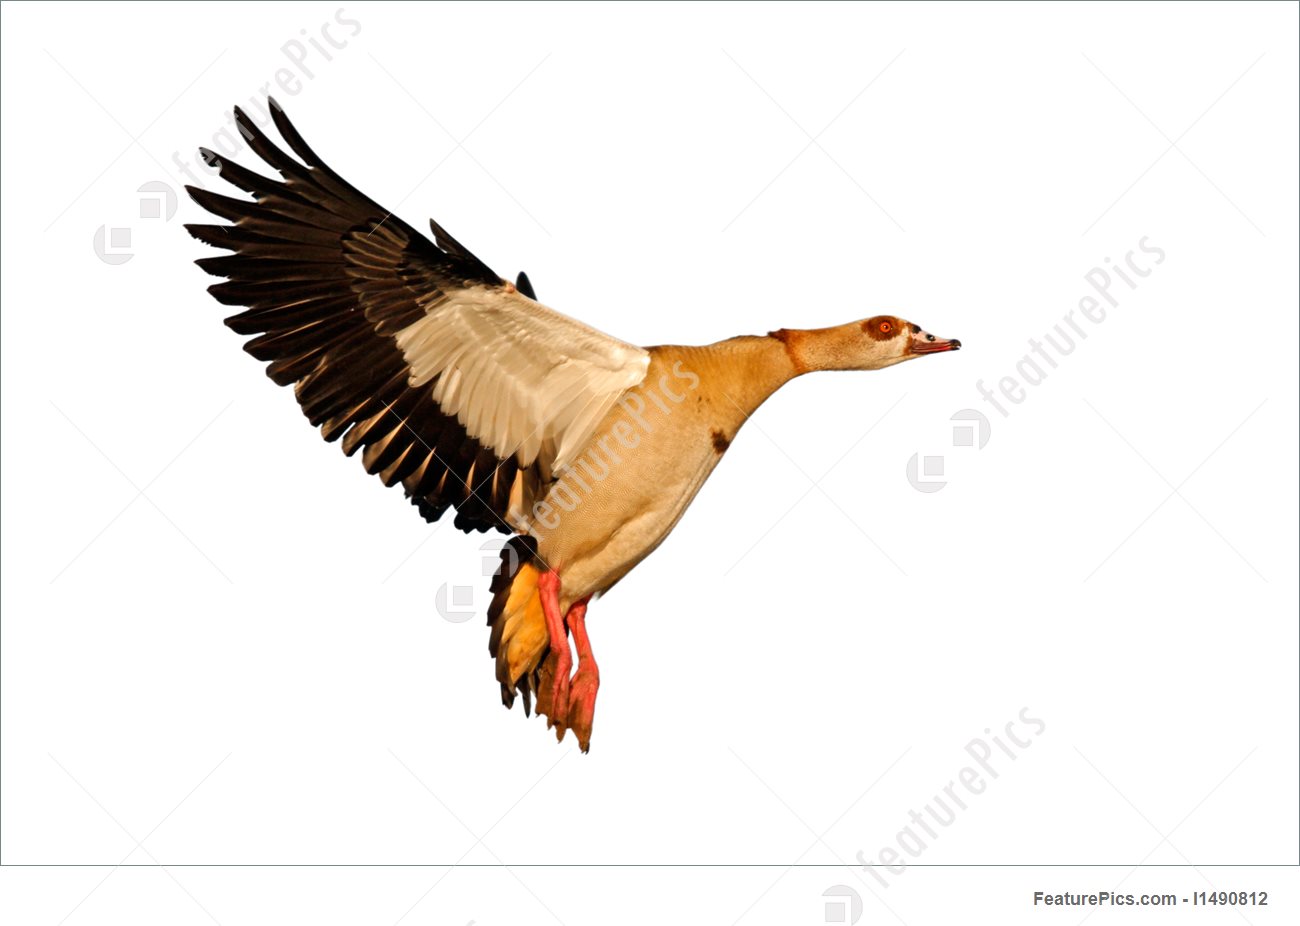 Egyptian Goose In Flight Picture.